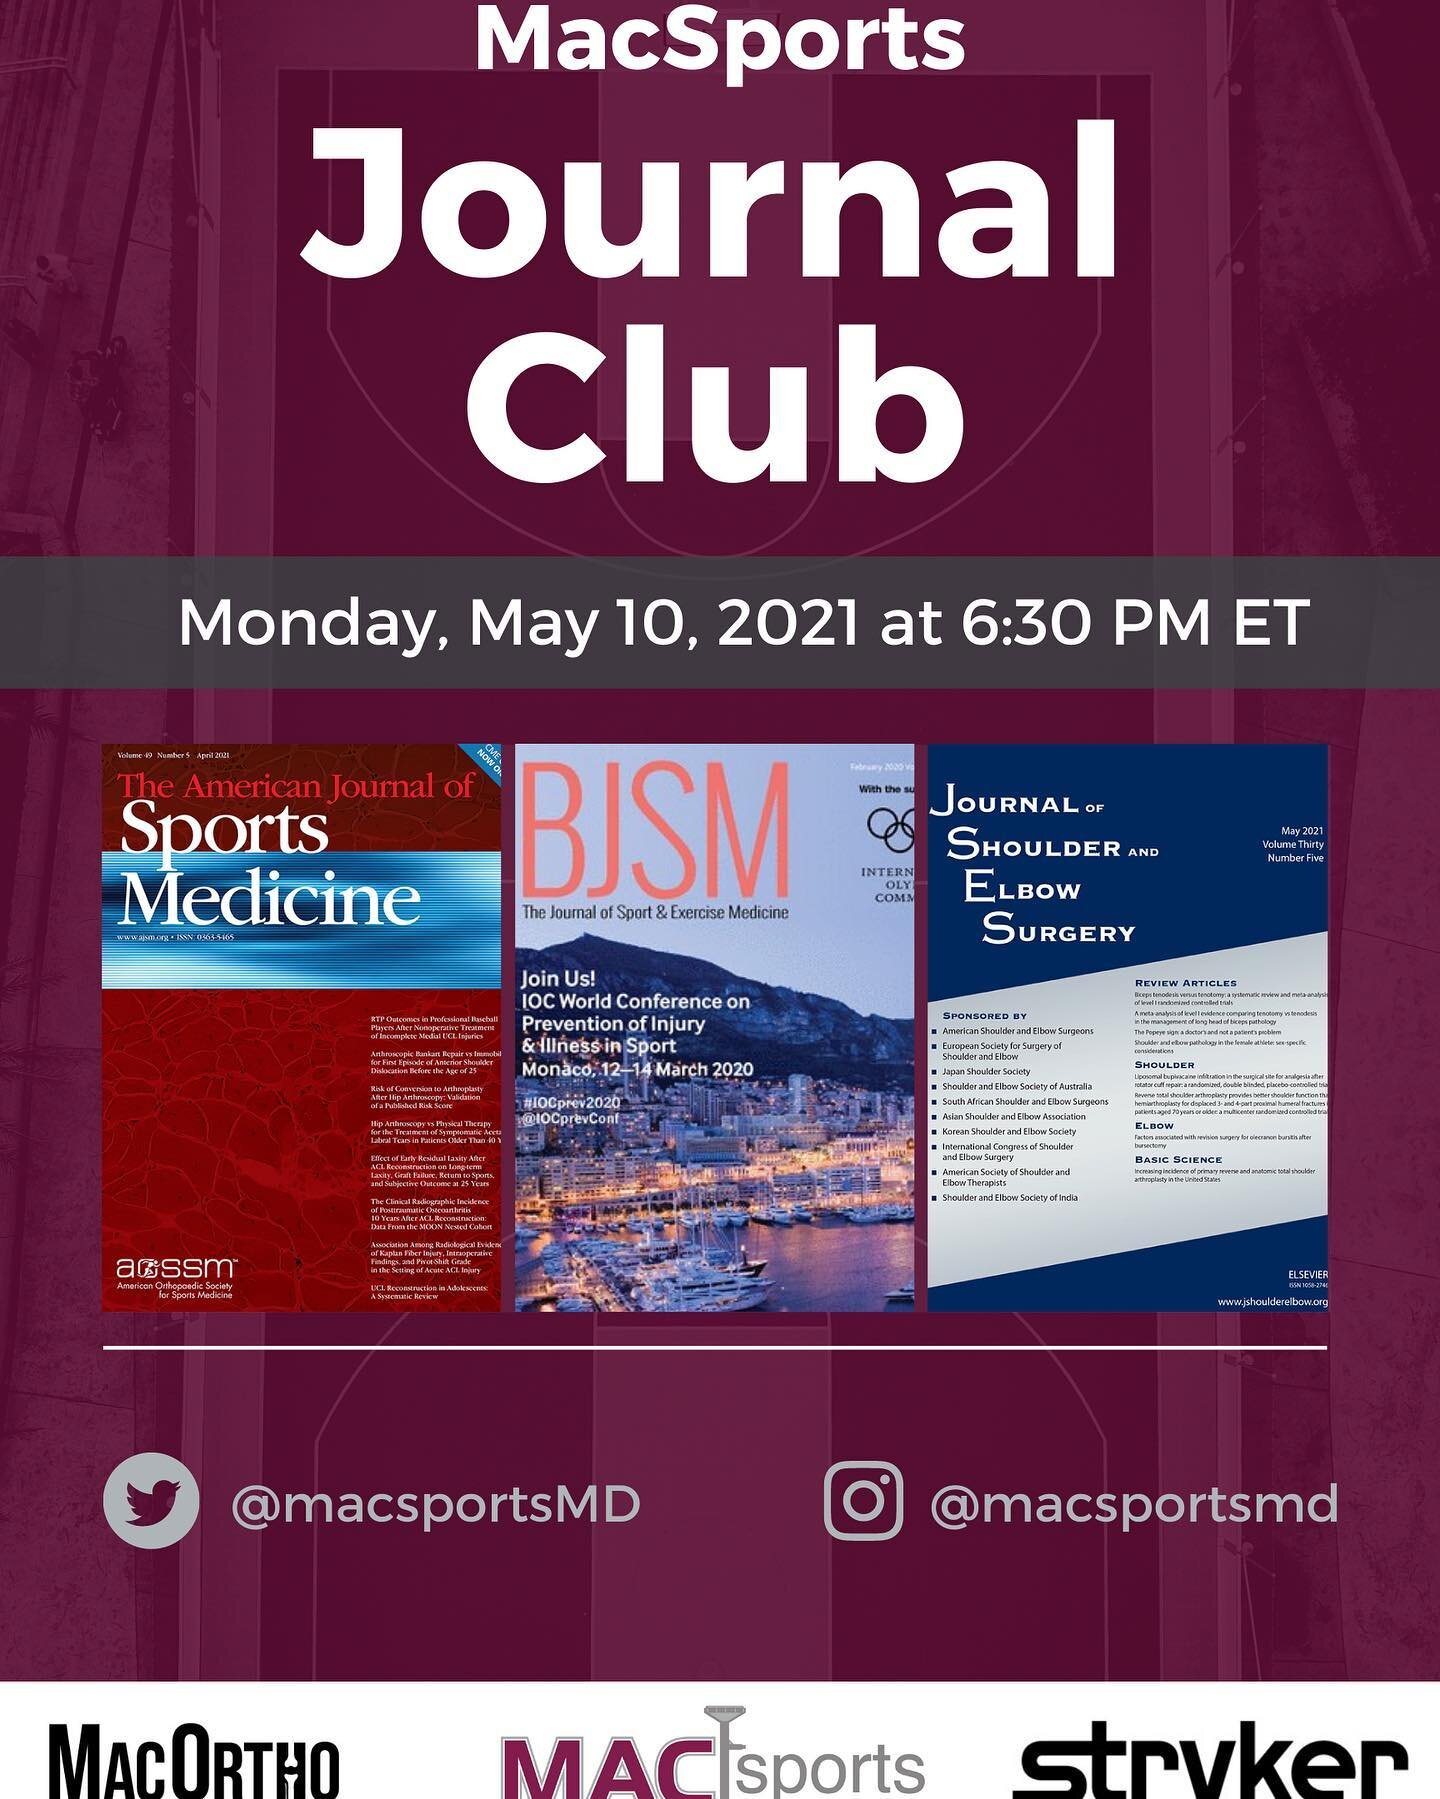 MacSports in conjunction with @macortho_  and Stryker are proud to host the our next journal club online on Monday, May 10 at 18:30.  Look forward to seeing you all there!  Registration link in bio.